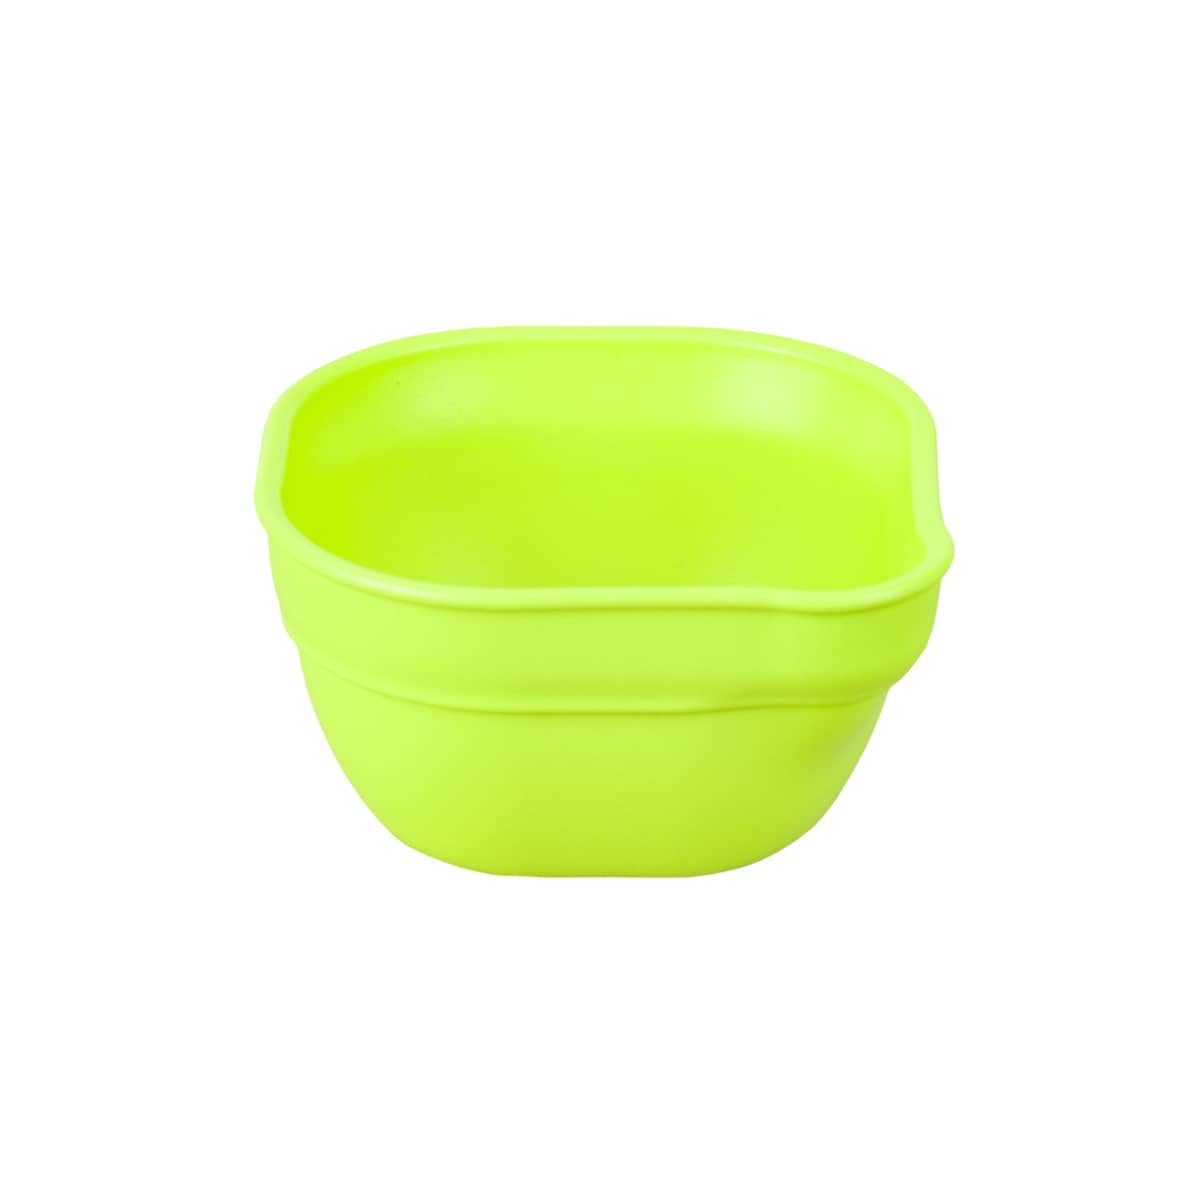 Re-Play Recycled Dip 'n' Pour Bowl - Green